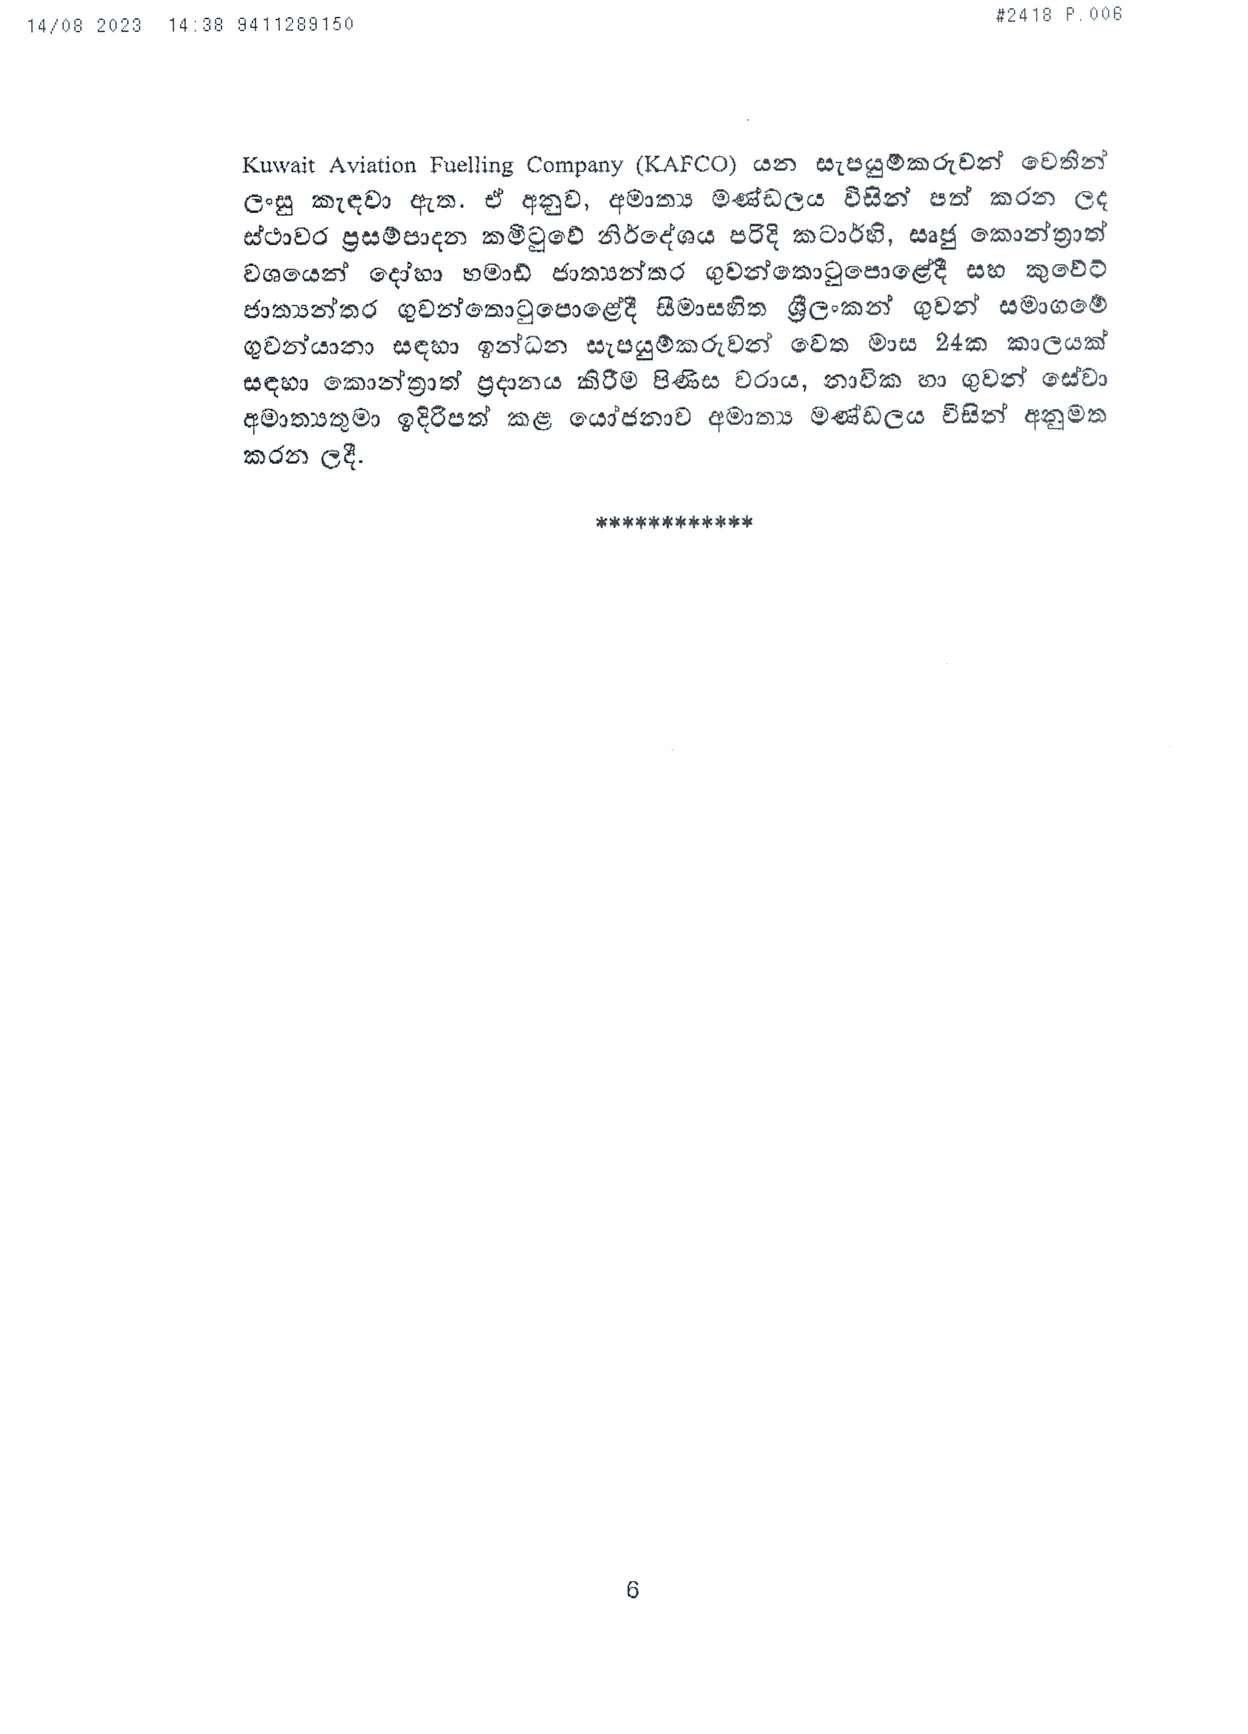 Cabinet Decision on 14.08.2023 1 page 006